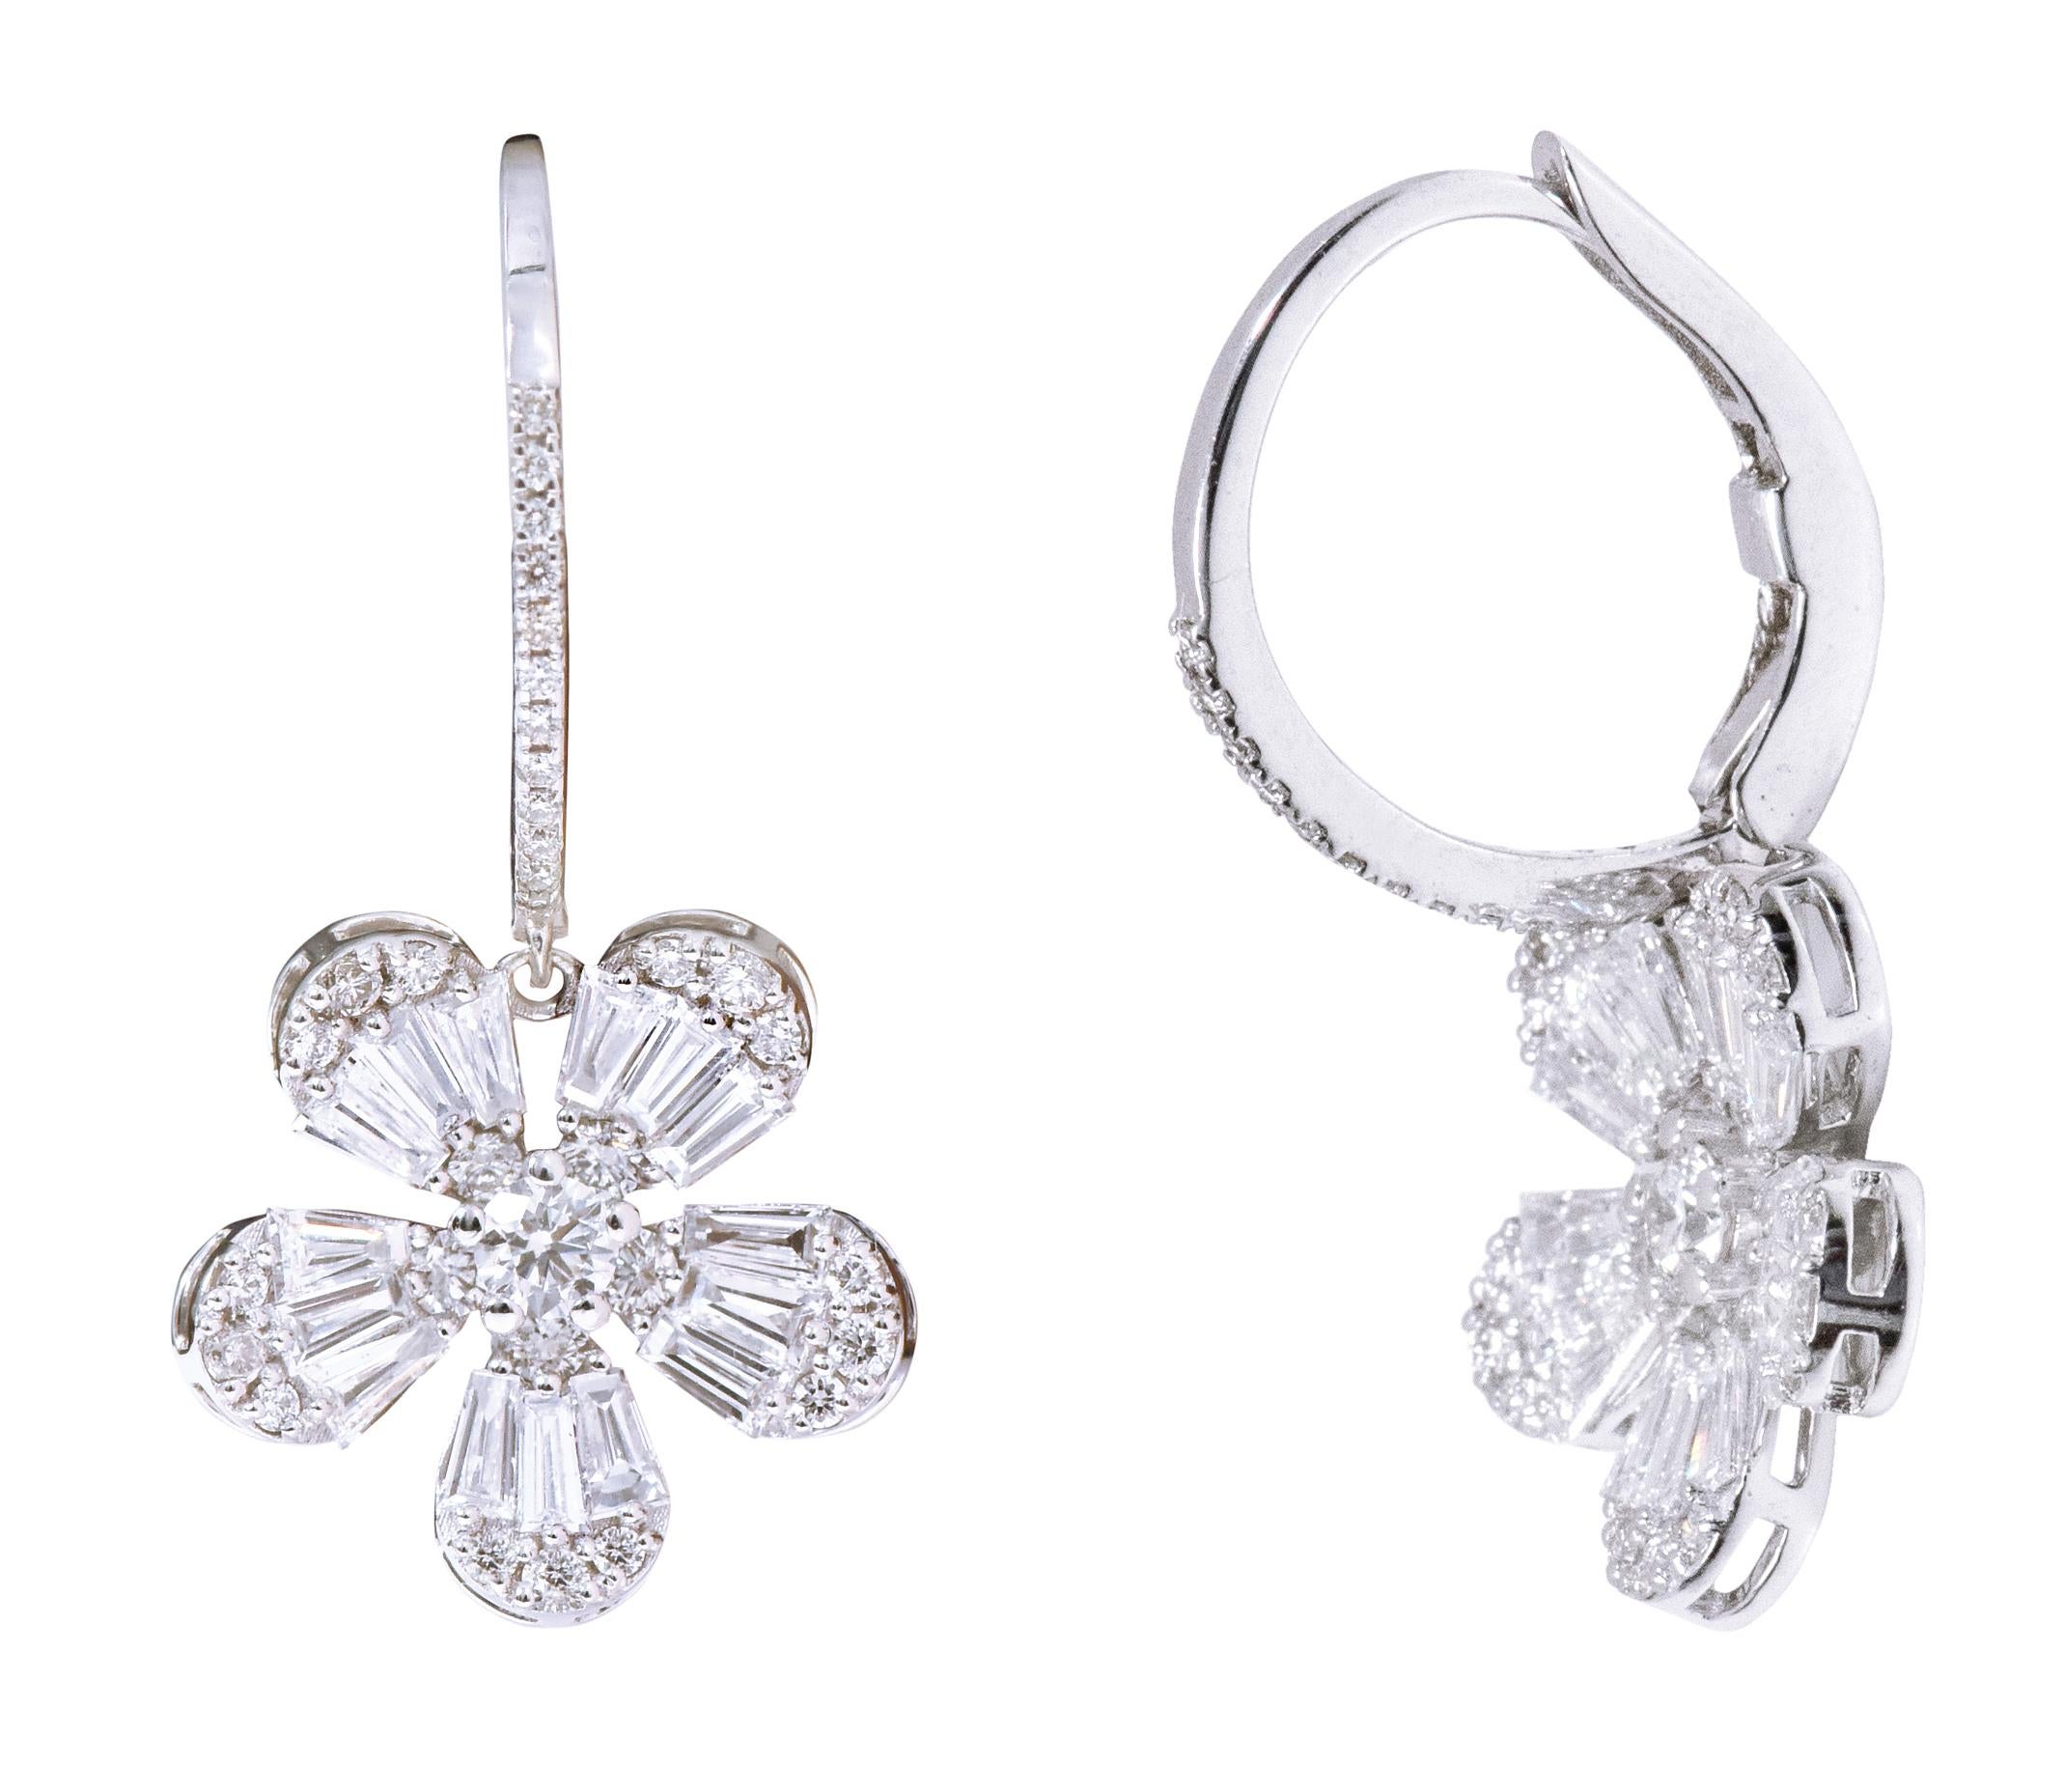 18 Karat White Gold 1.71 Carat Diamond Flower Drop Earrings

This glorious invisible set petal shaped diamond floral hanging earring is magnificent. The invisible diamond petal shape in white gold setting is a crafty design wherein 3 smaller tapered